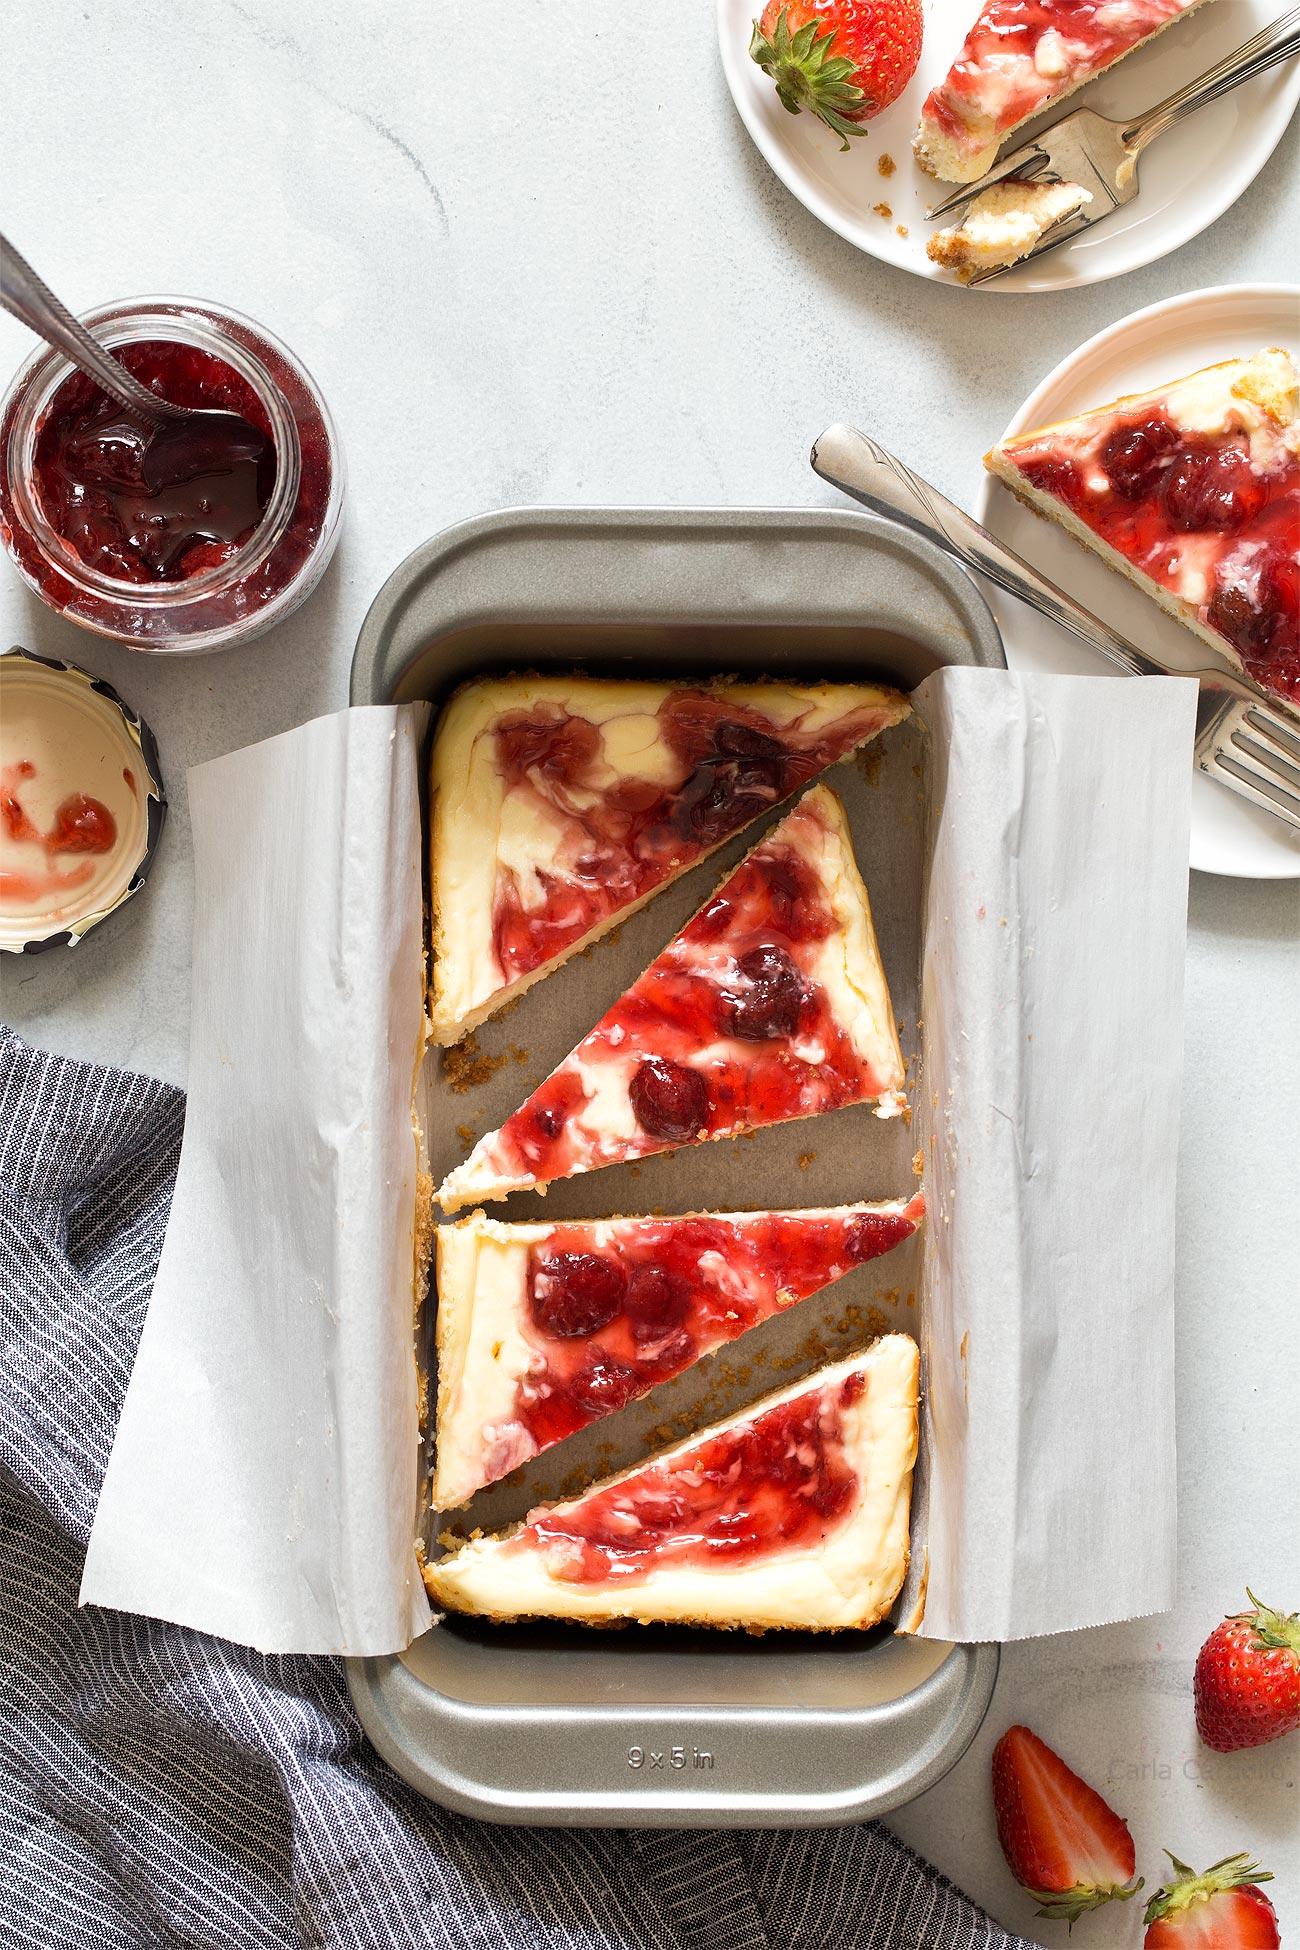 The best cheesecake recipe baked in a loaf pan! These Small Batch Strawberry Swirl Cheesecake Bars makes about 6 bars, ideal if you're looking for portion control.